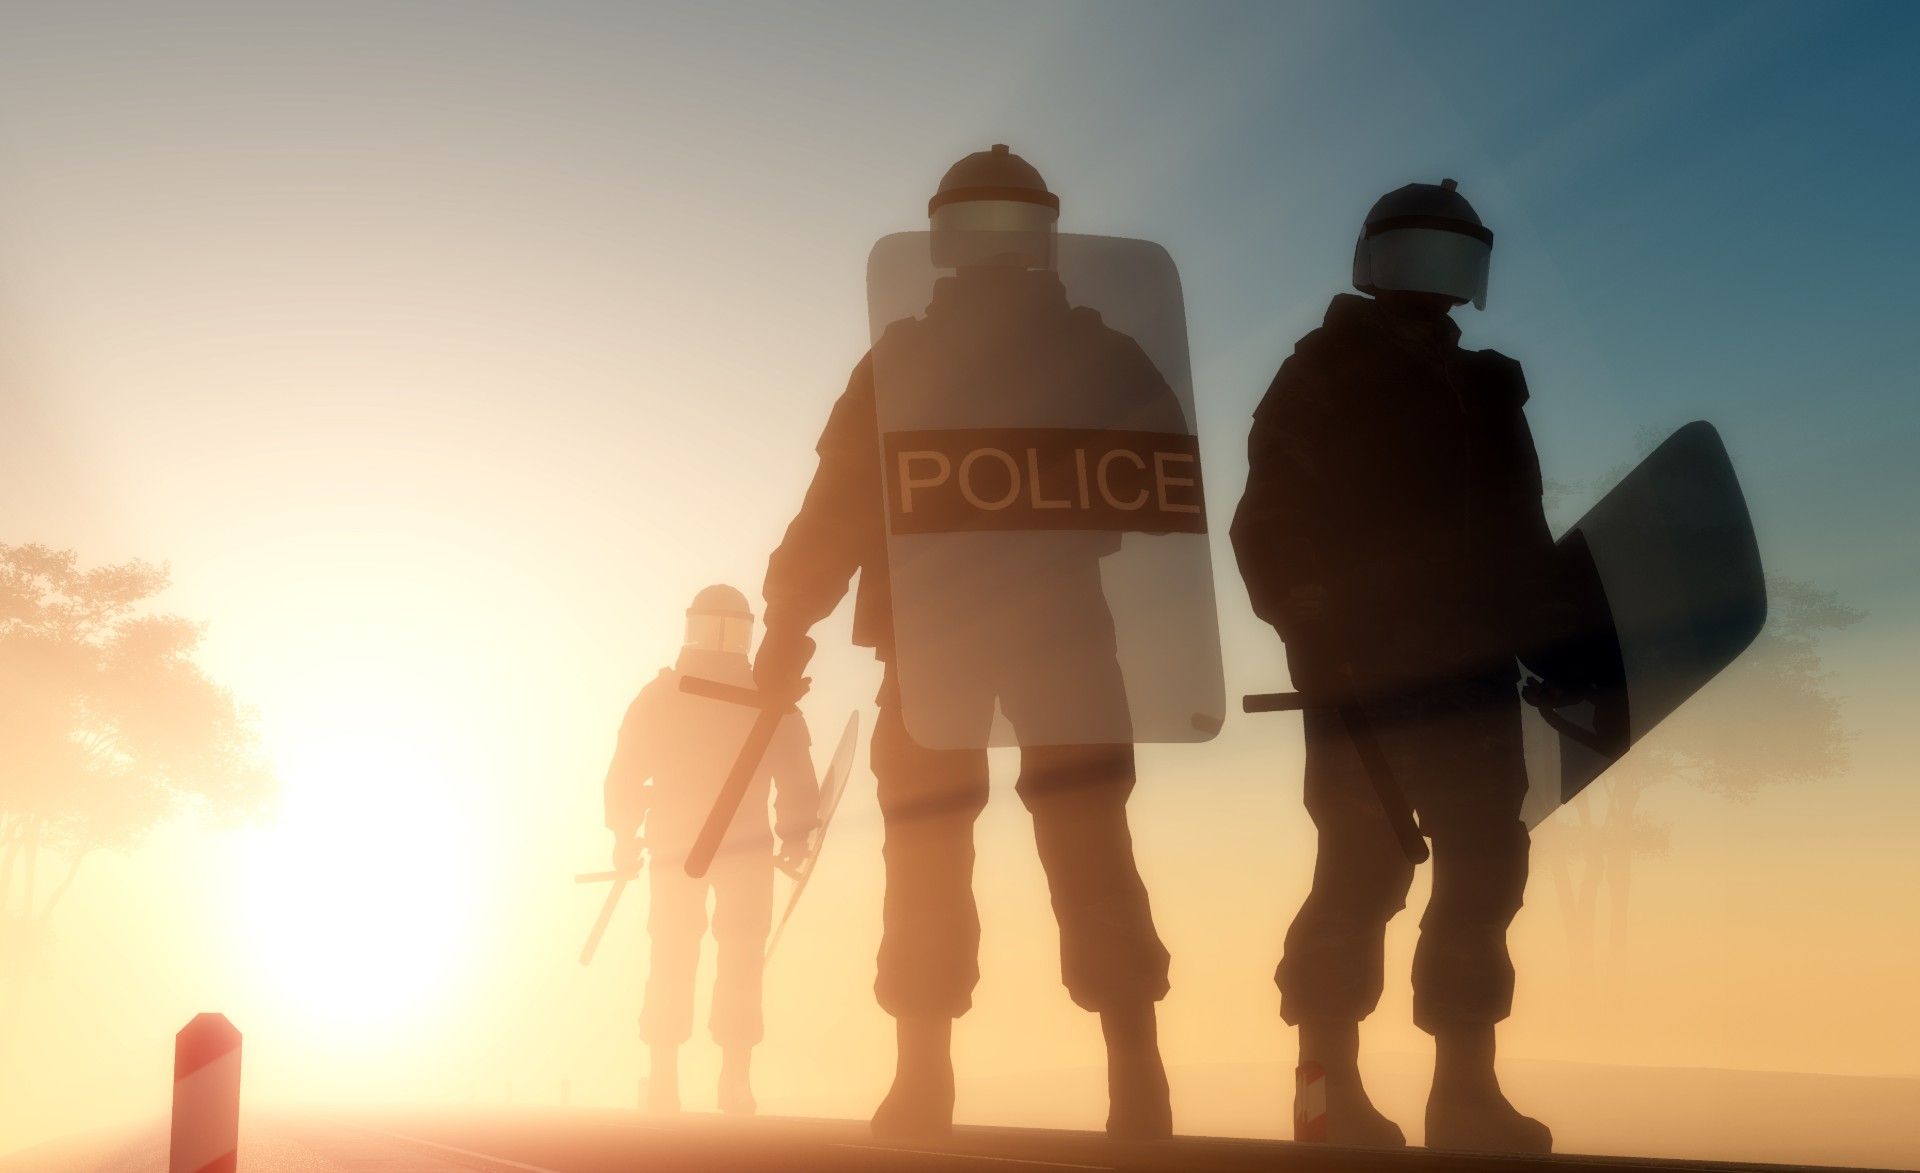 Police with shields and weapons, sun shining at horizon behind them